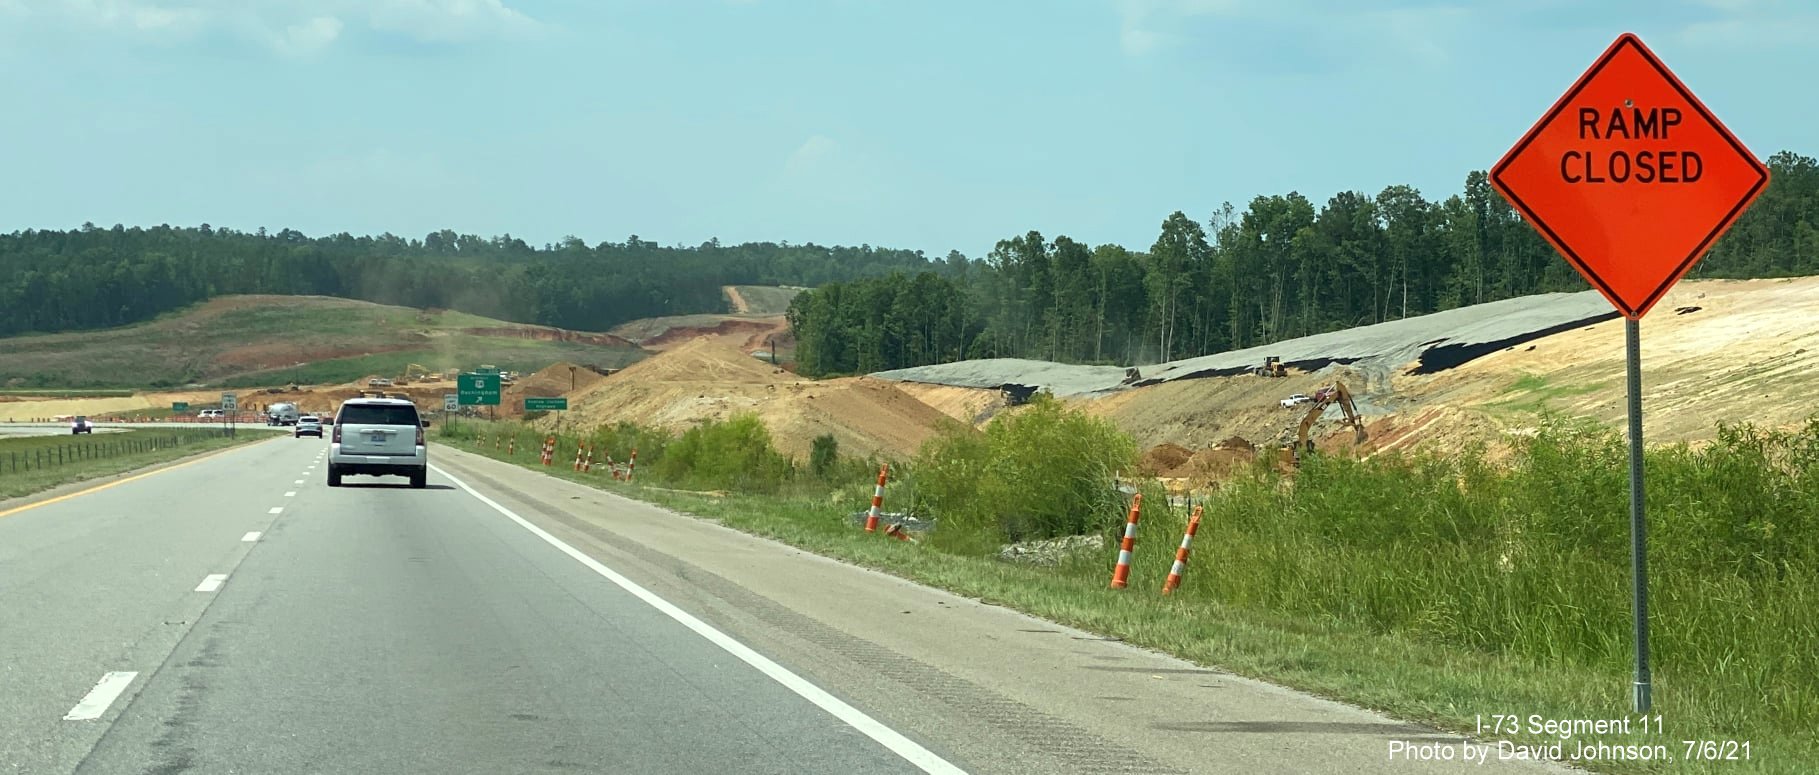 Image of temporary ramp closed sign for closed Business US 74 interchange in I-73/I-74 Rockingham Bypass construction zone as seen from 
        US 74 West, by David Johnson, July 2021